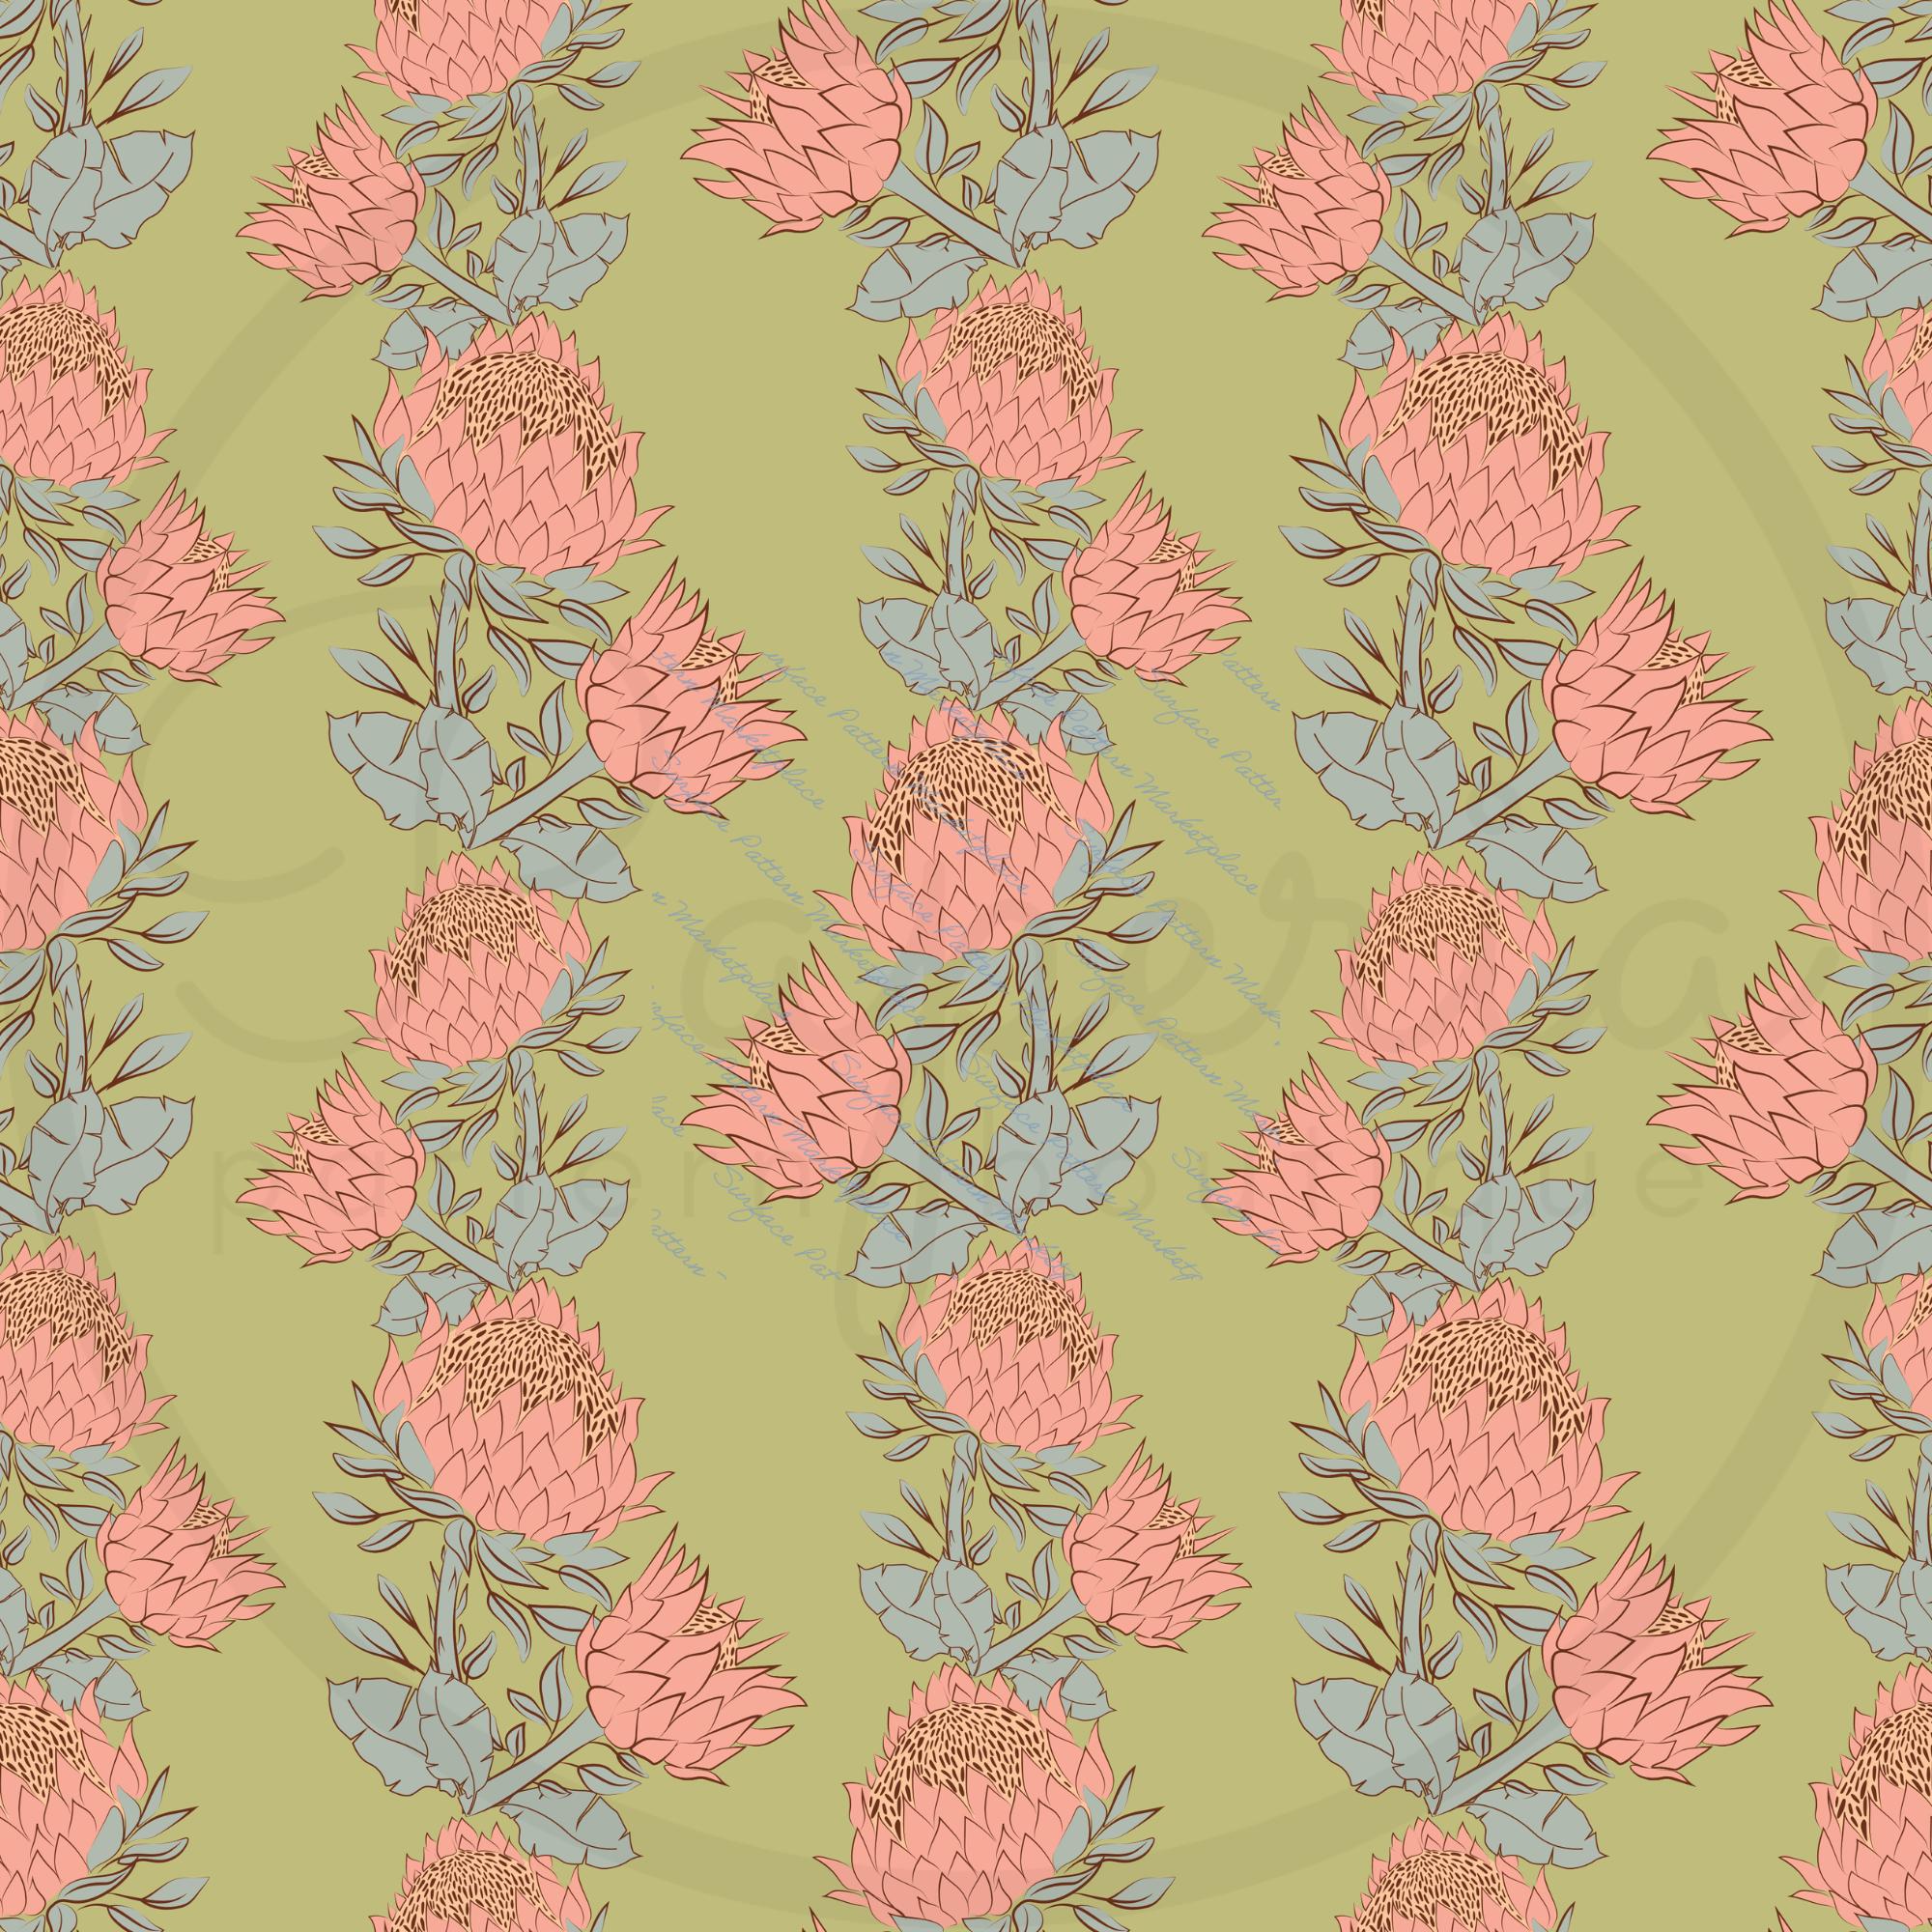 Floral Boho Seamless Repeating Pattern File for Fabric